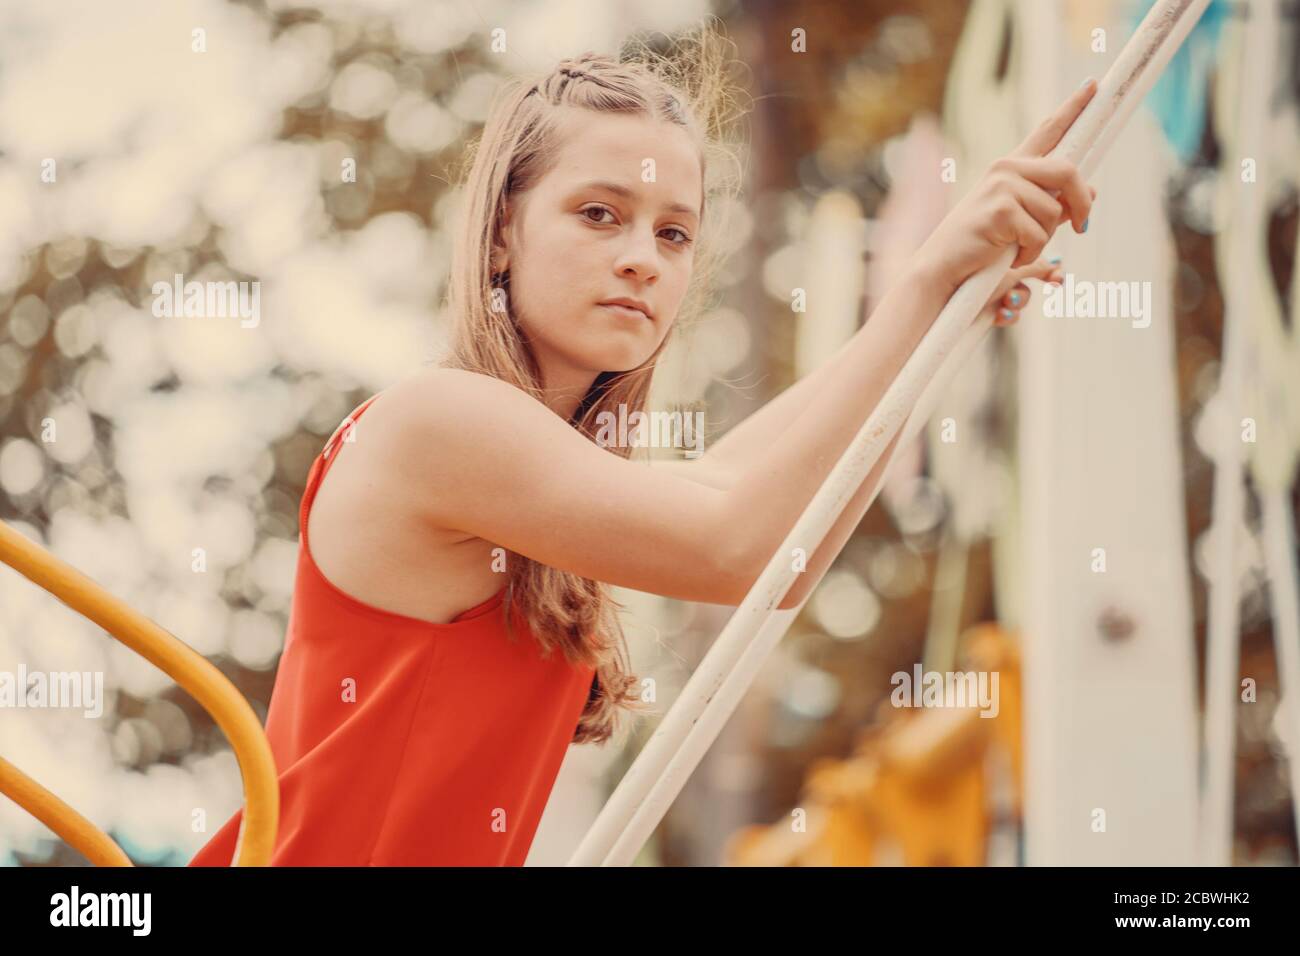 fashionable girl in a red dress on a swing in the park Stock Photo